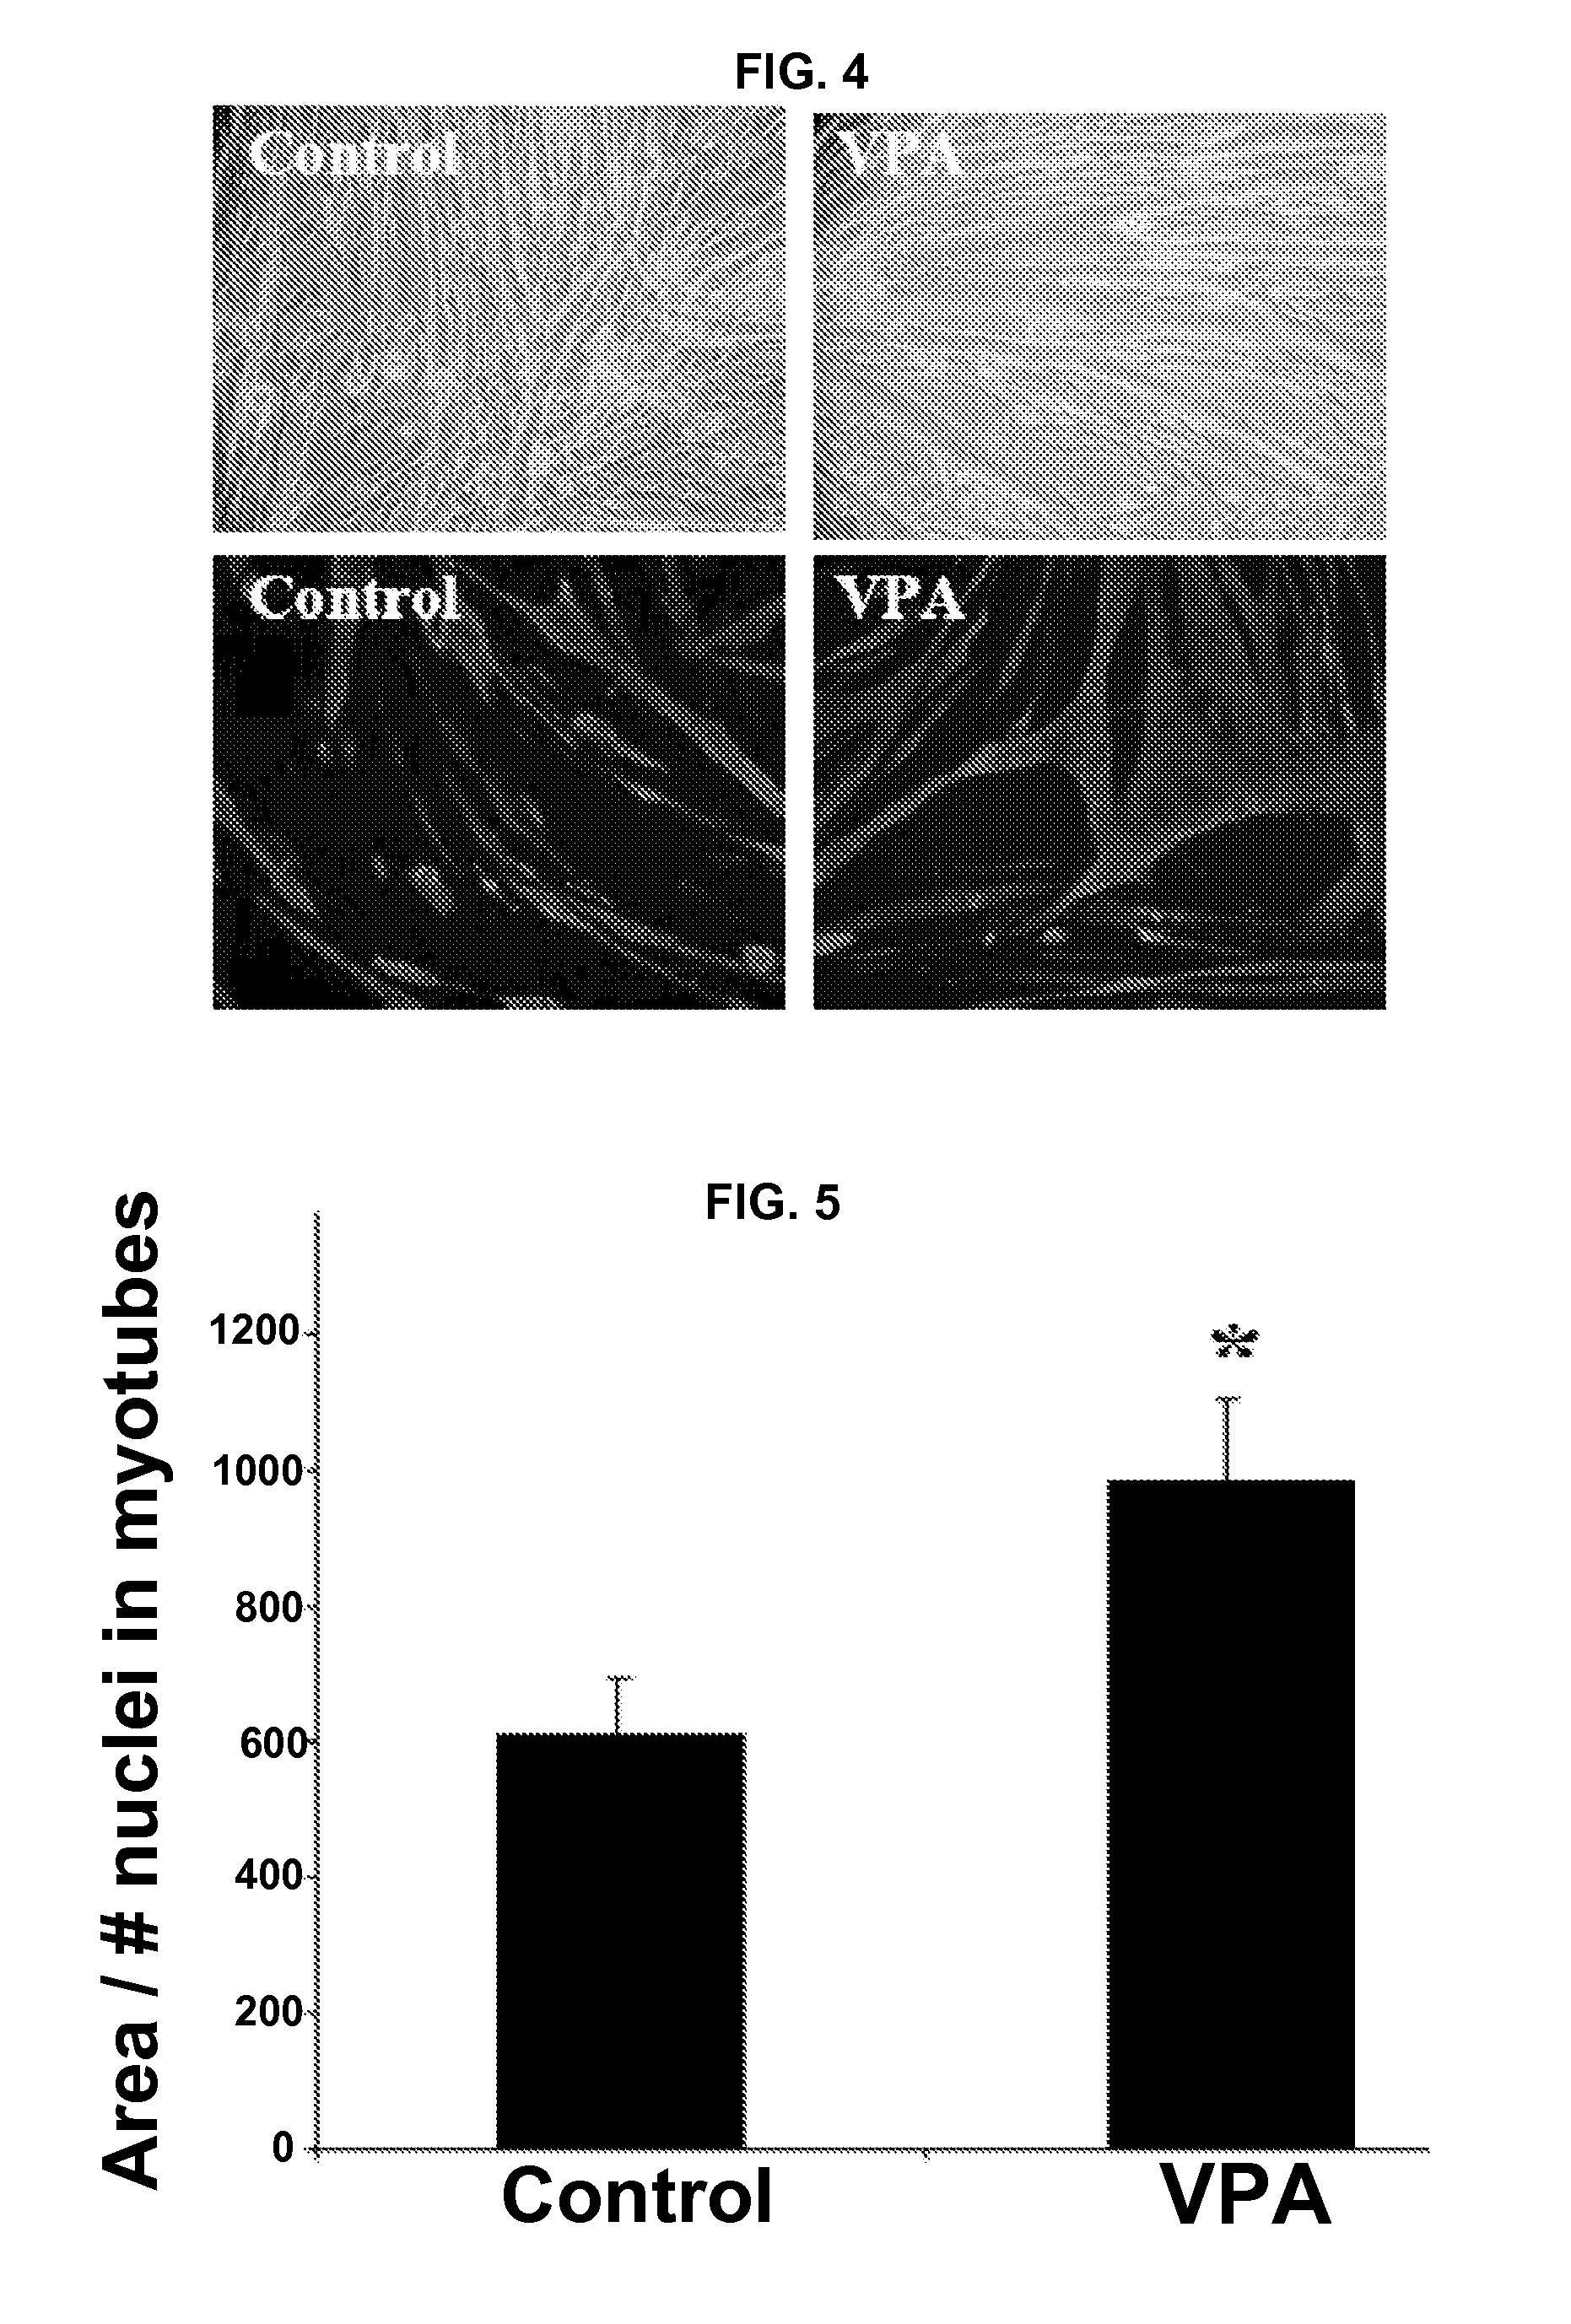 Valproic acid, derivatives, analogues, and compositions including same and methods for their therapeutic use